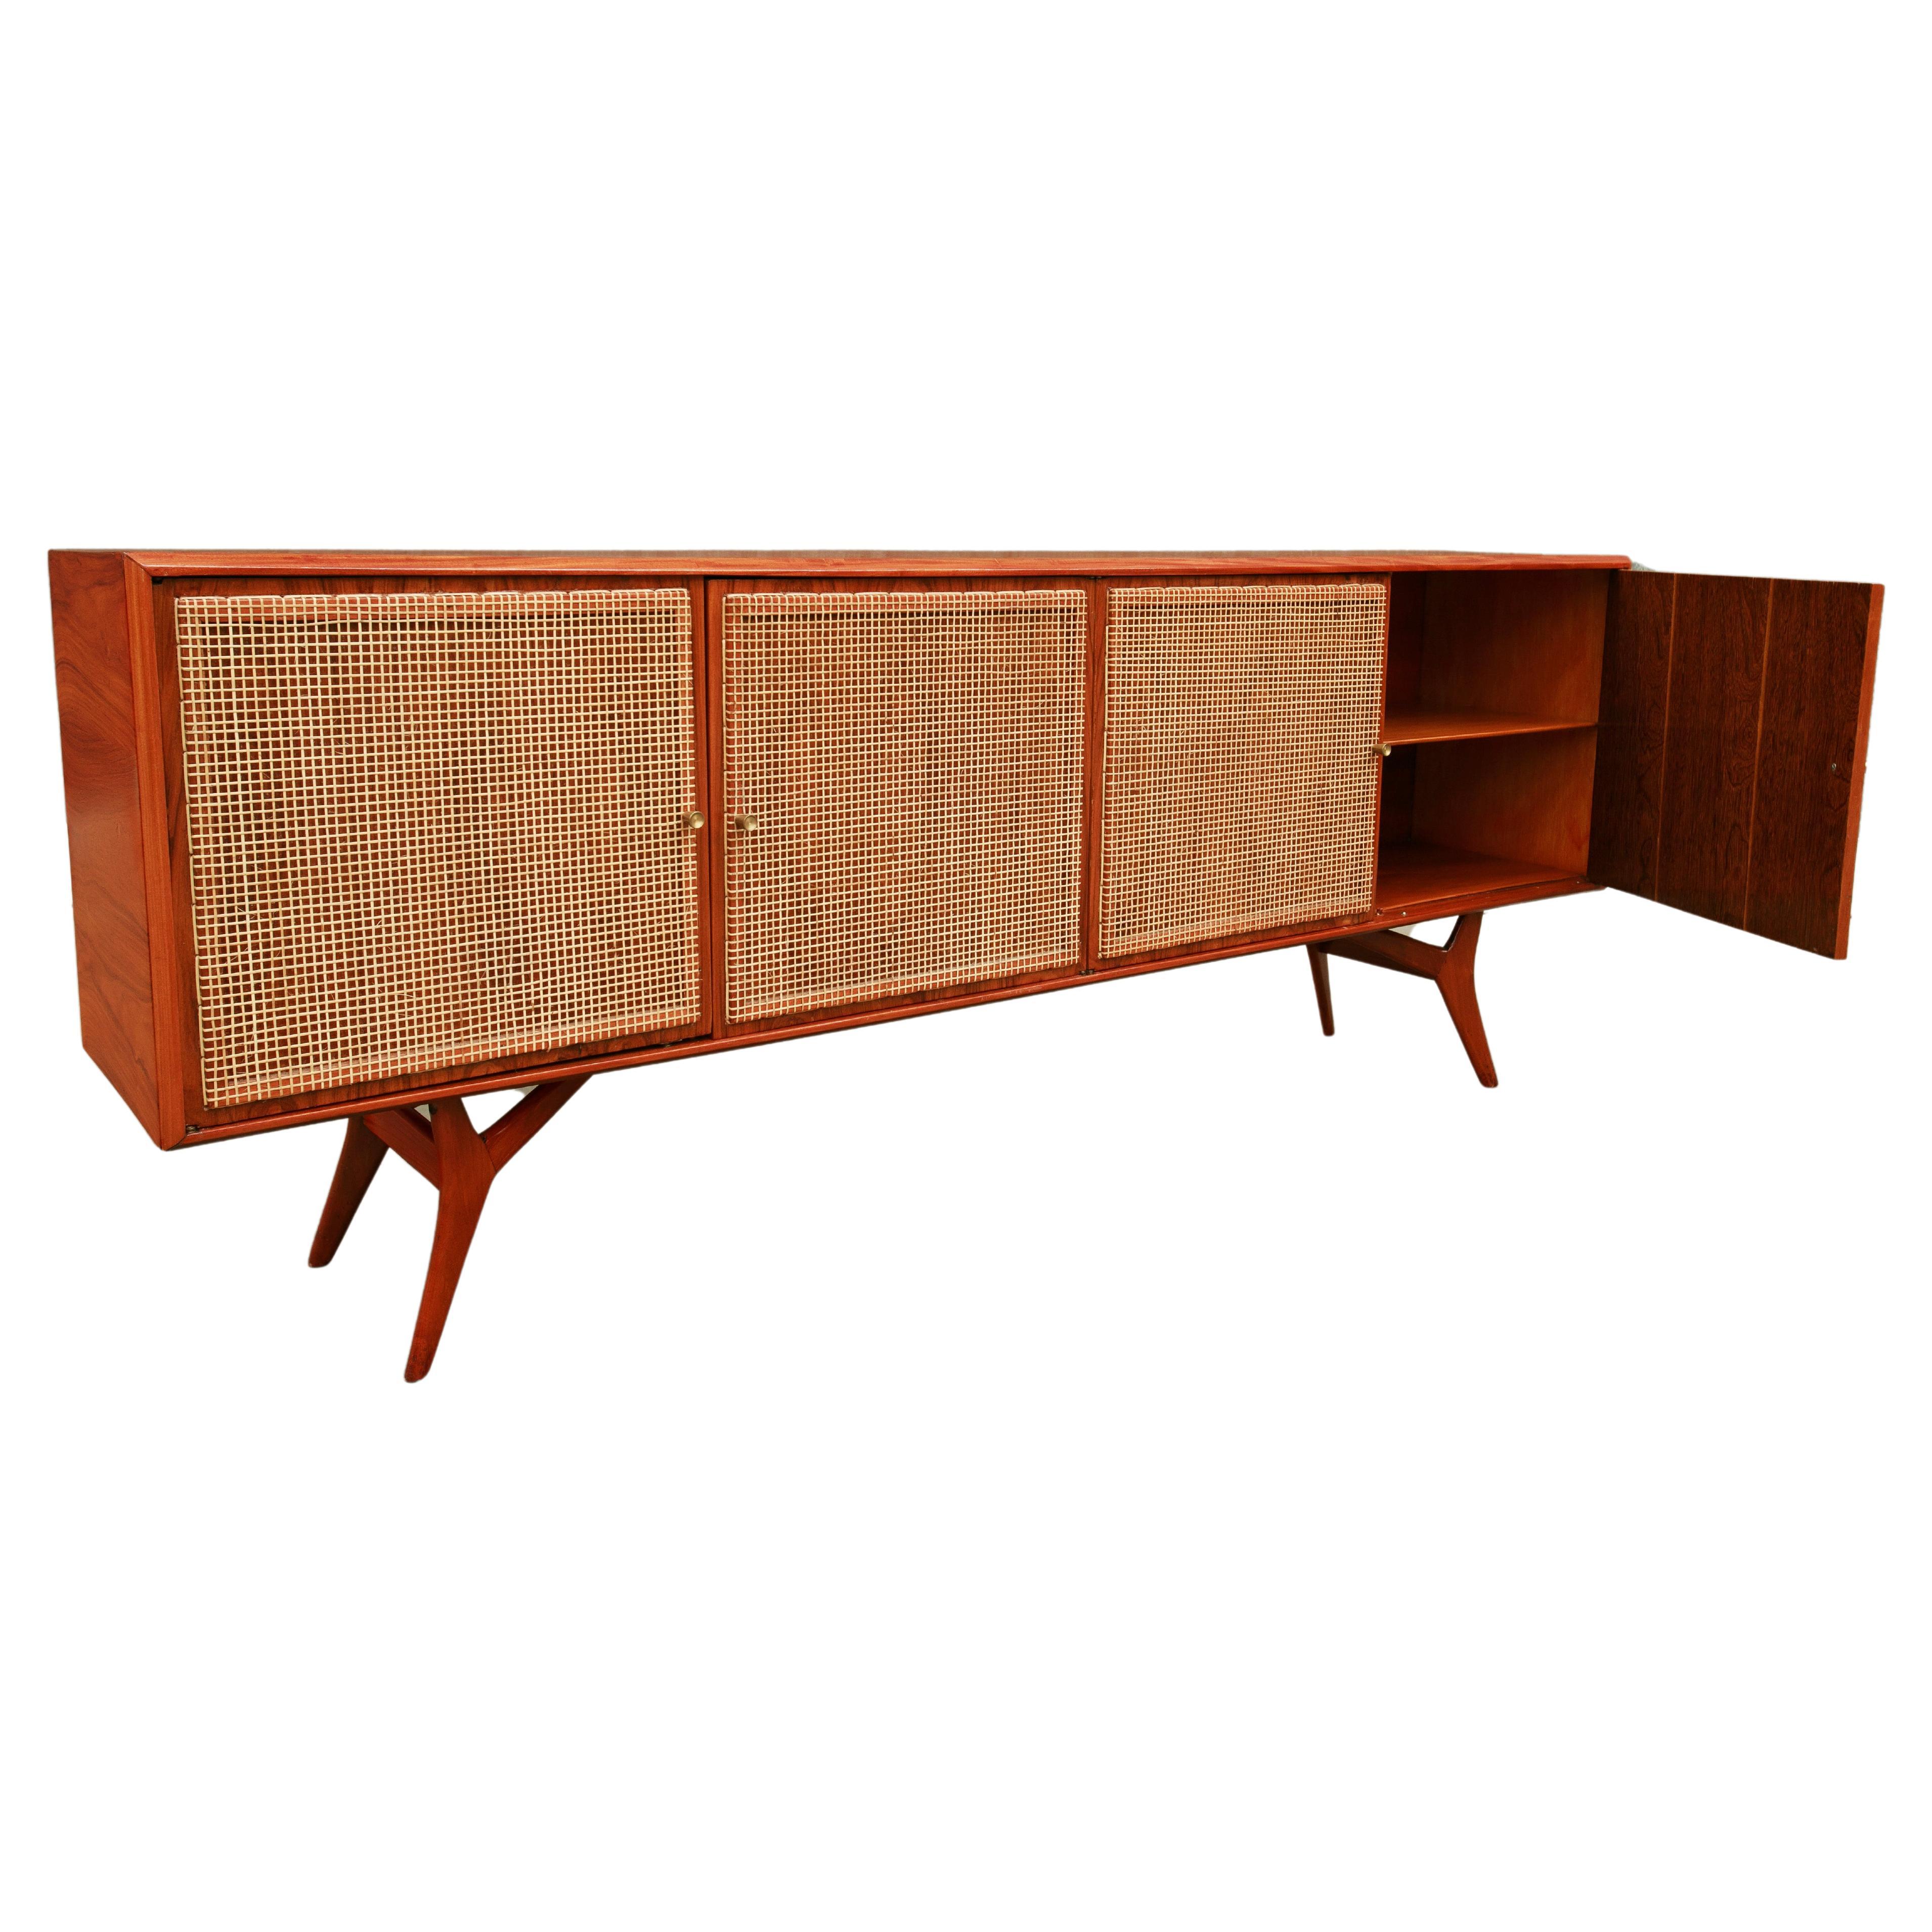 1950s Brazilian Modern Credenza in Hardwood & Caning by Forma For Sale